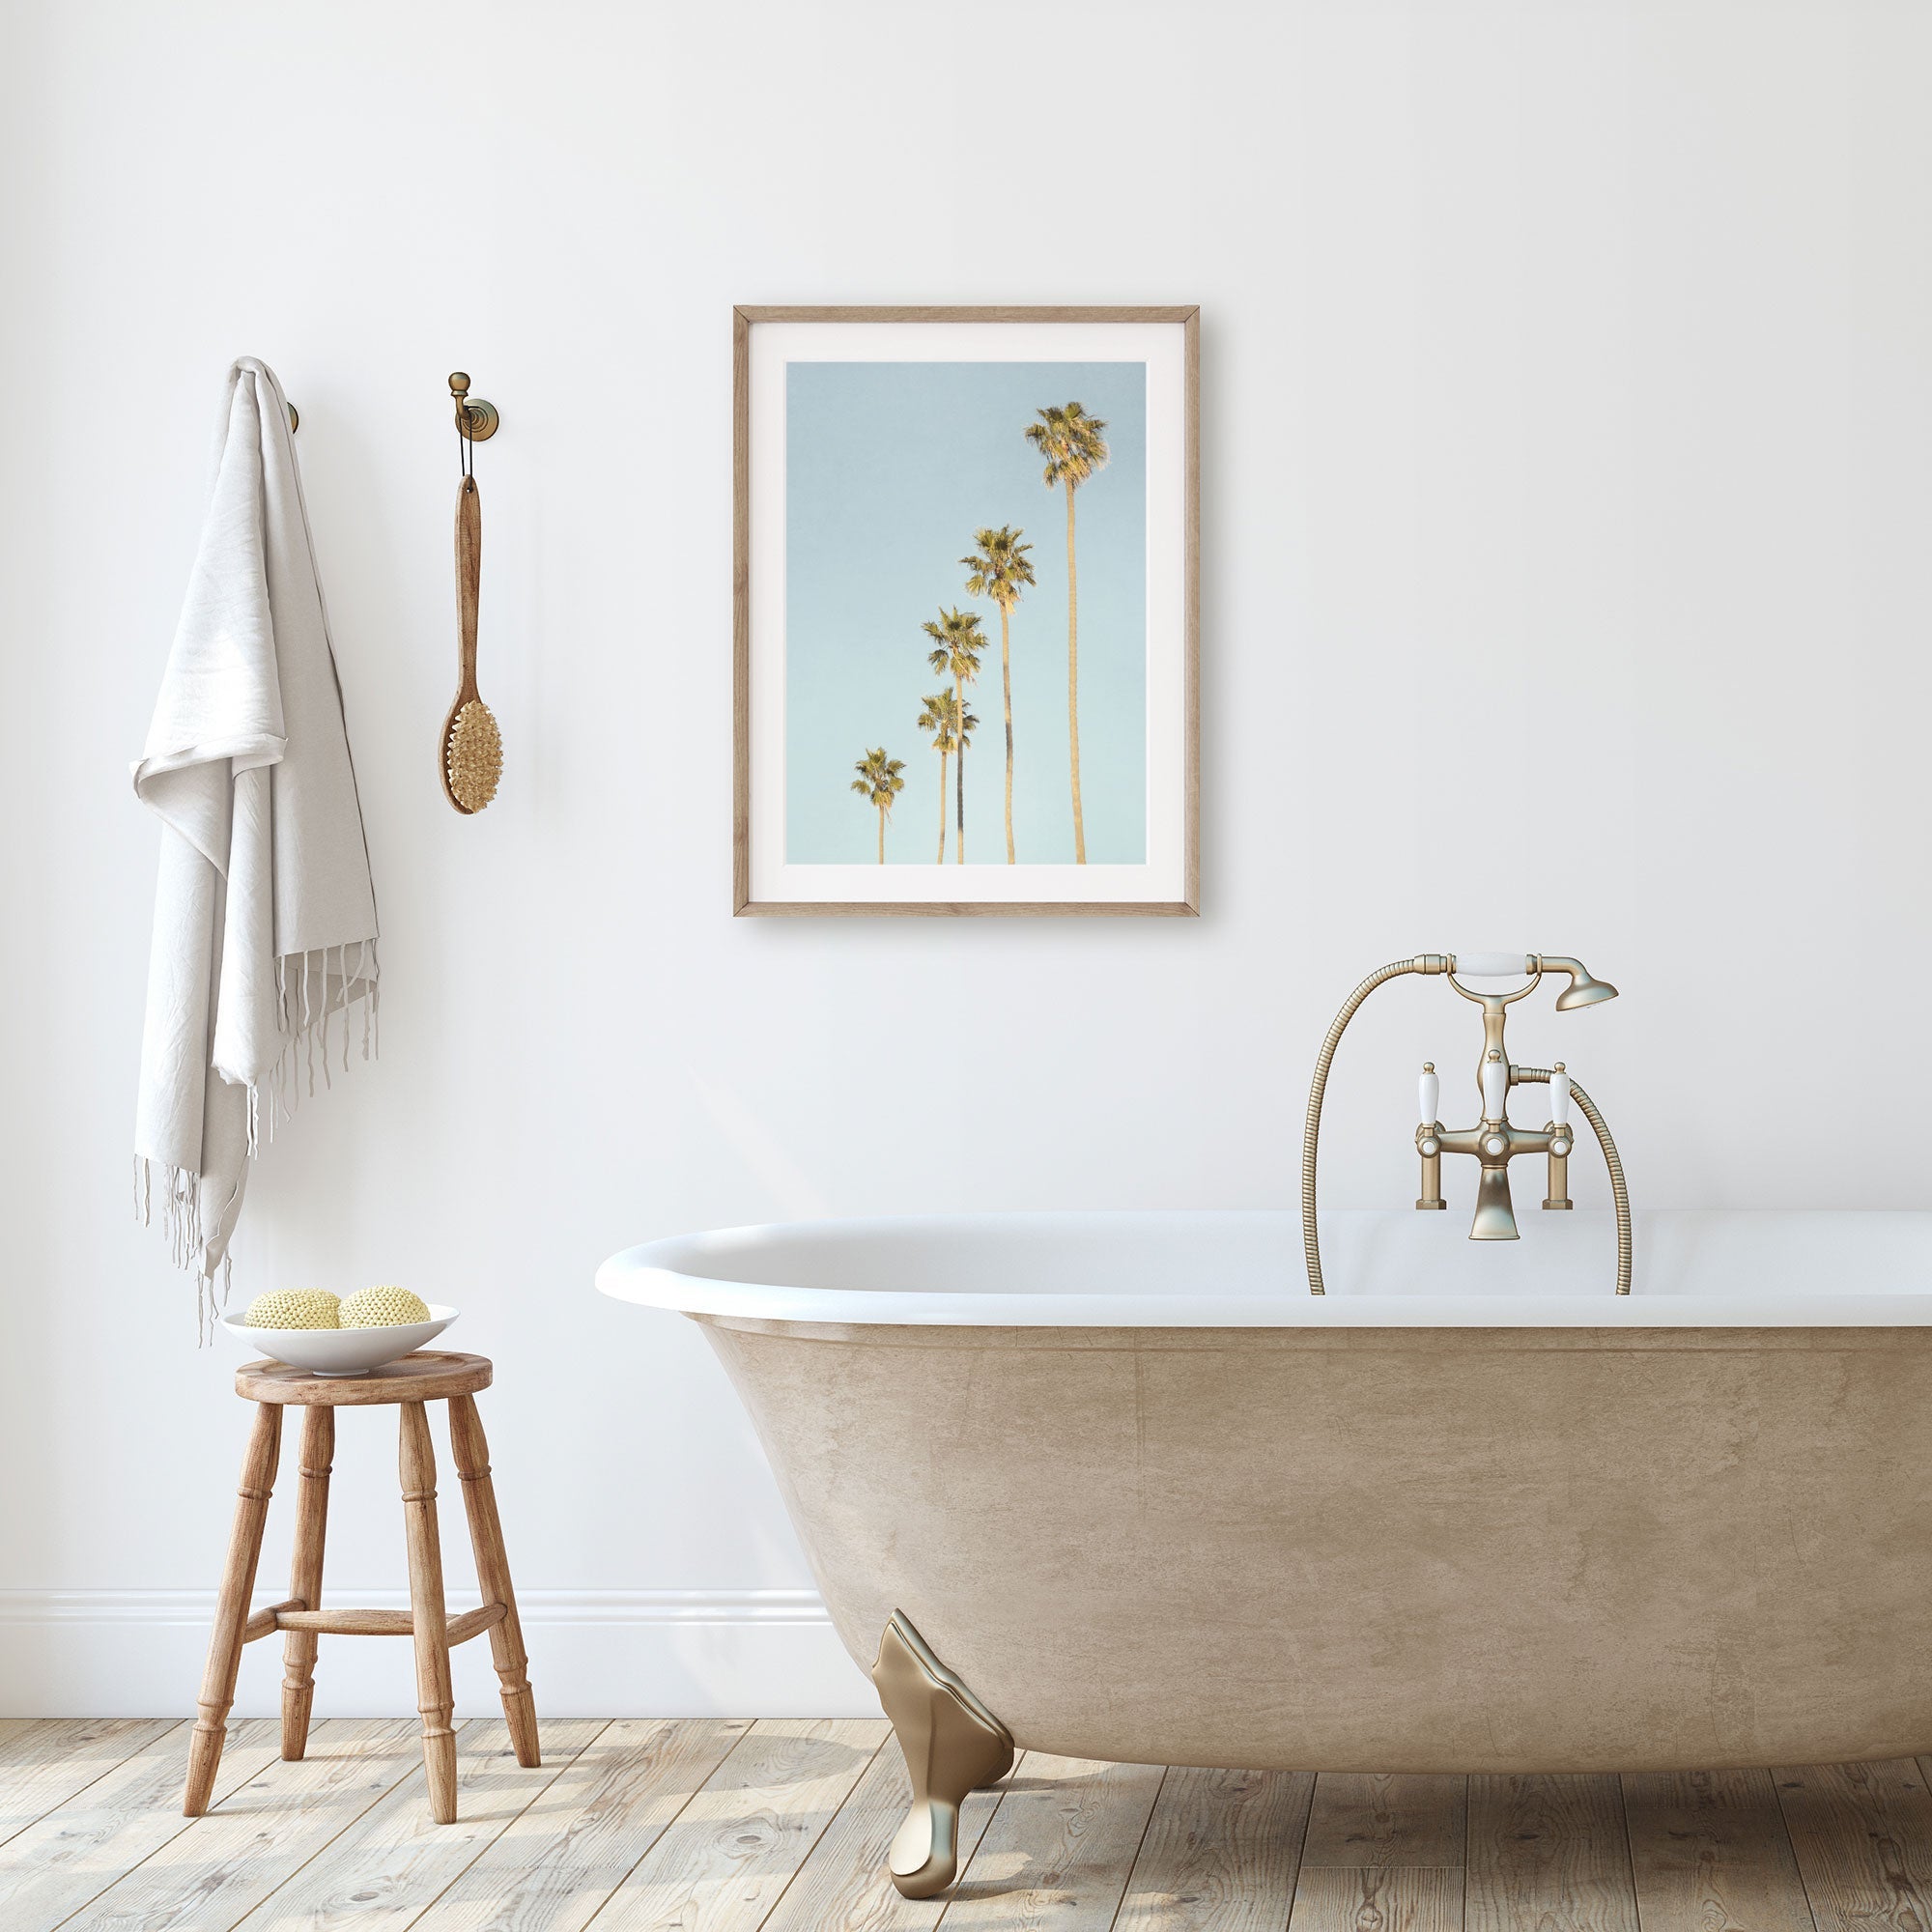 A minimalist bathroom featuring a clawfoot tub with a gold faucet, a wooden stool with toiletries, and a framed Offley Green "Los Angeles Palm Tree Photographic Print 'Palm Tree Steps'" on the wall, complemented by hanging towels.